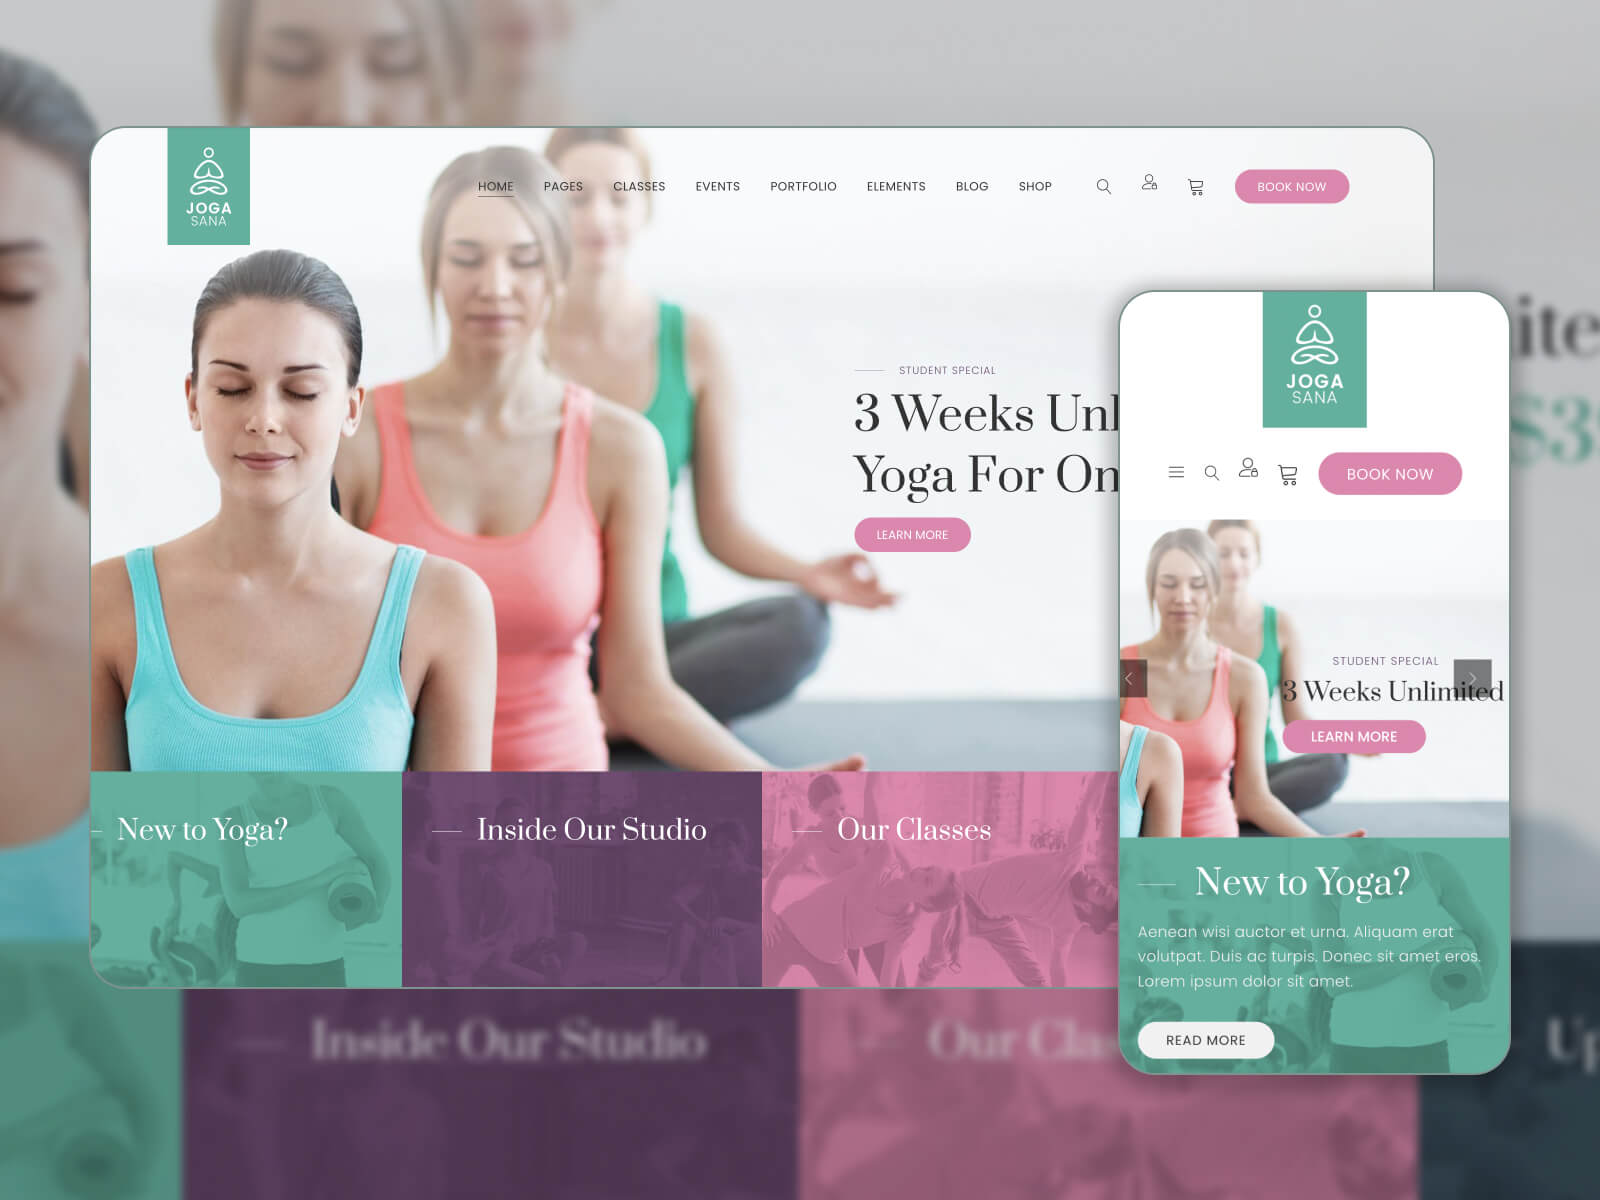 Snapshot of Jogasana - responsive design yoga website template for WordPress in darkslategray, cadetblue, silver, whitesmoke, and rosybrown color mix